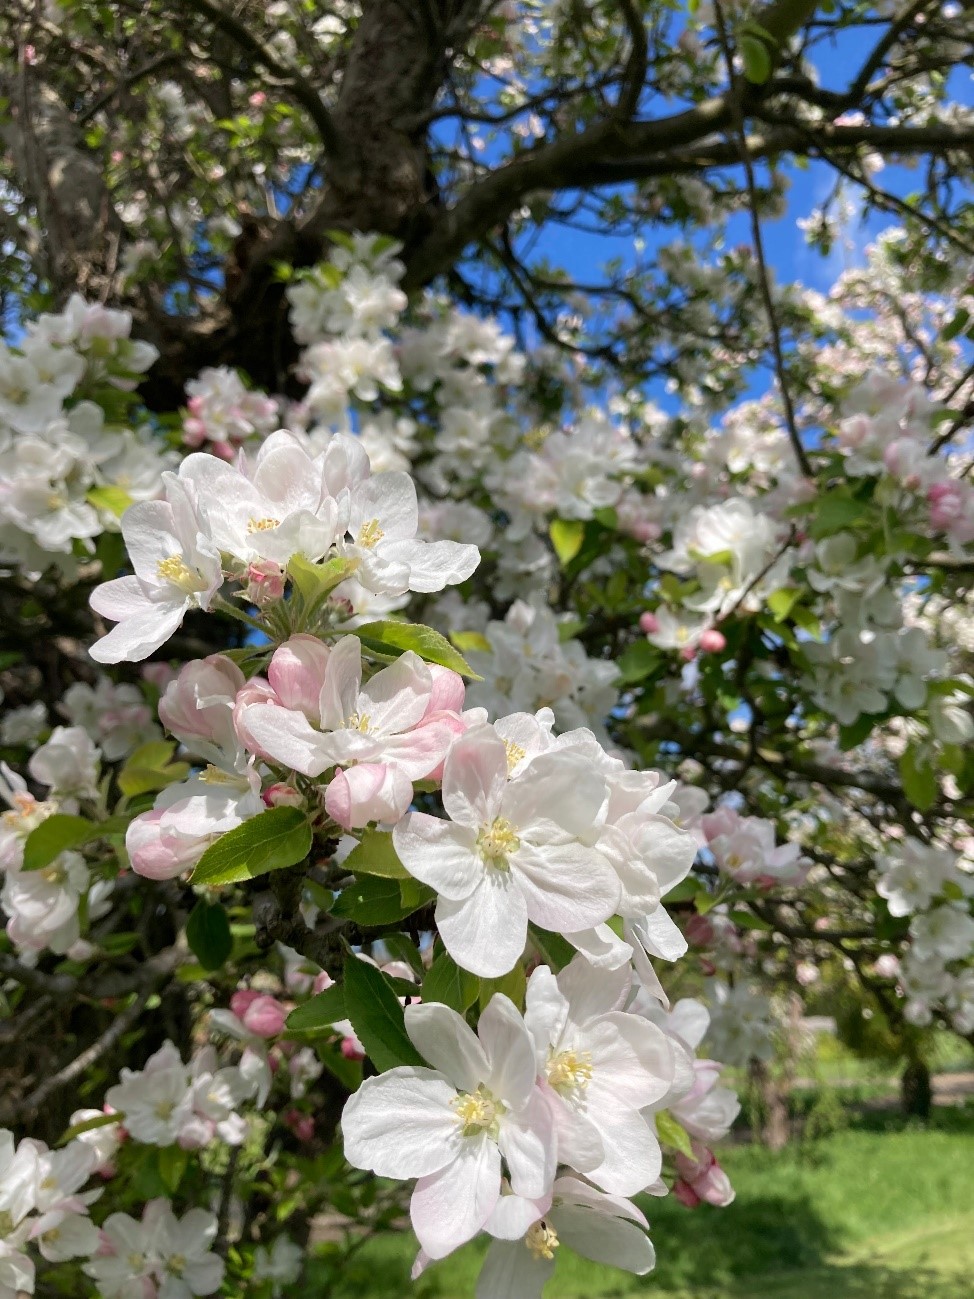 The orchards were full of apple blossom at the beginning of May